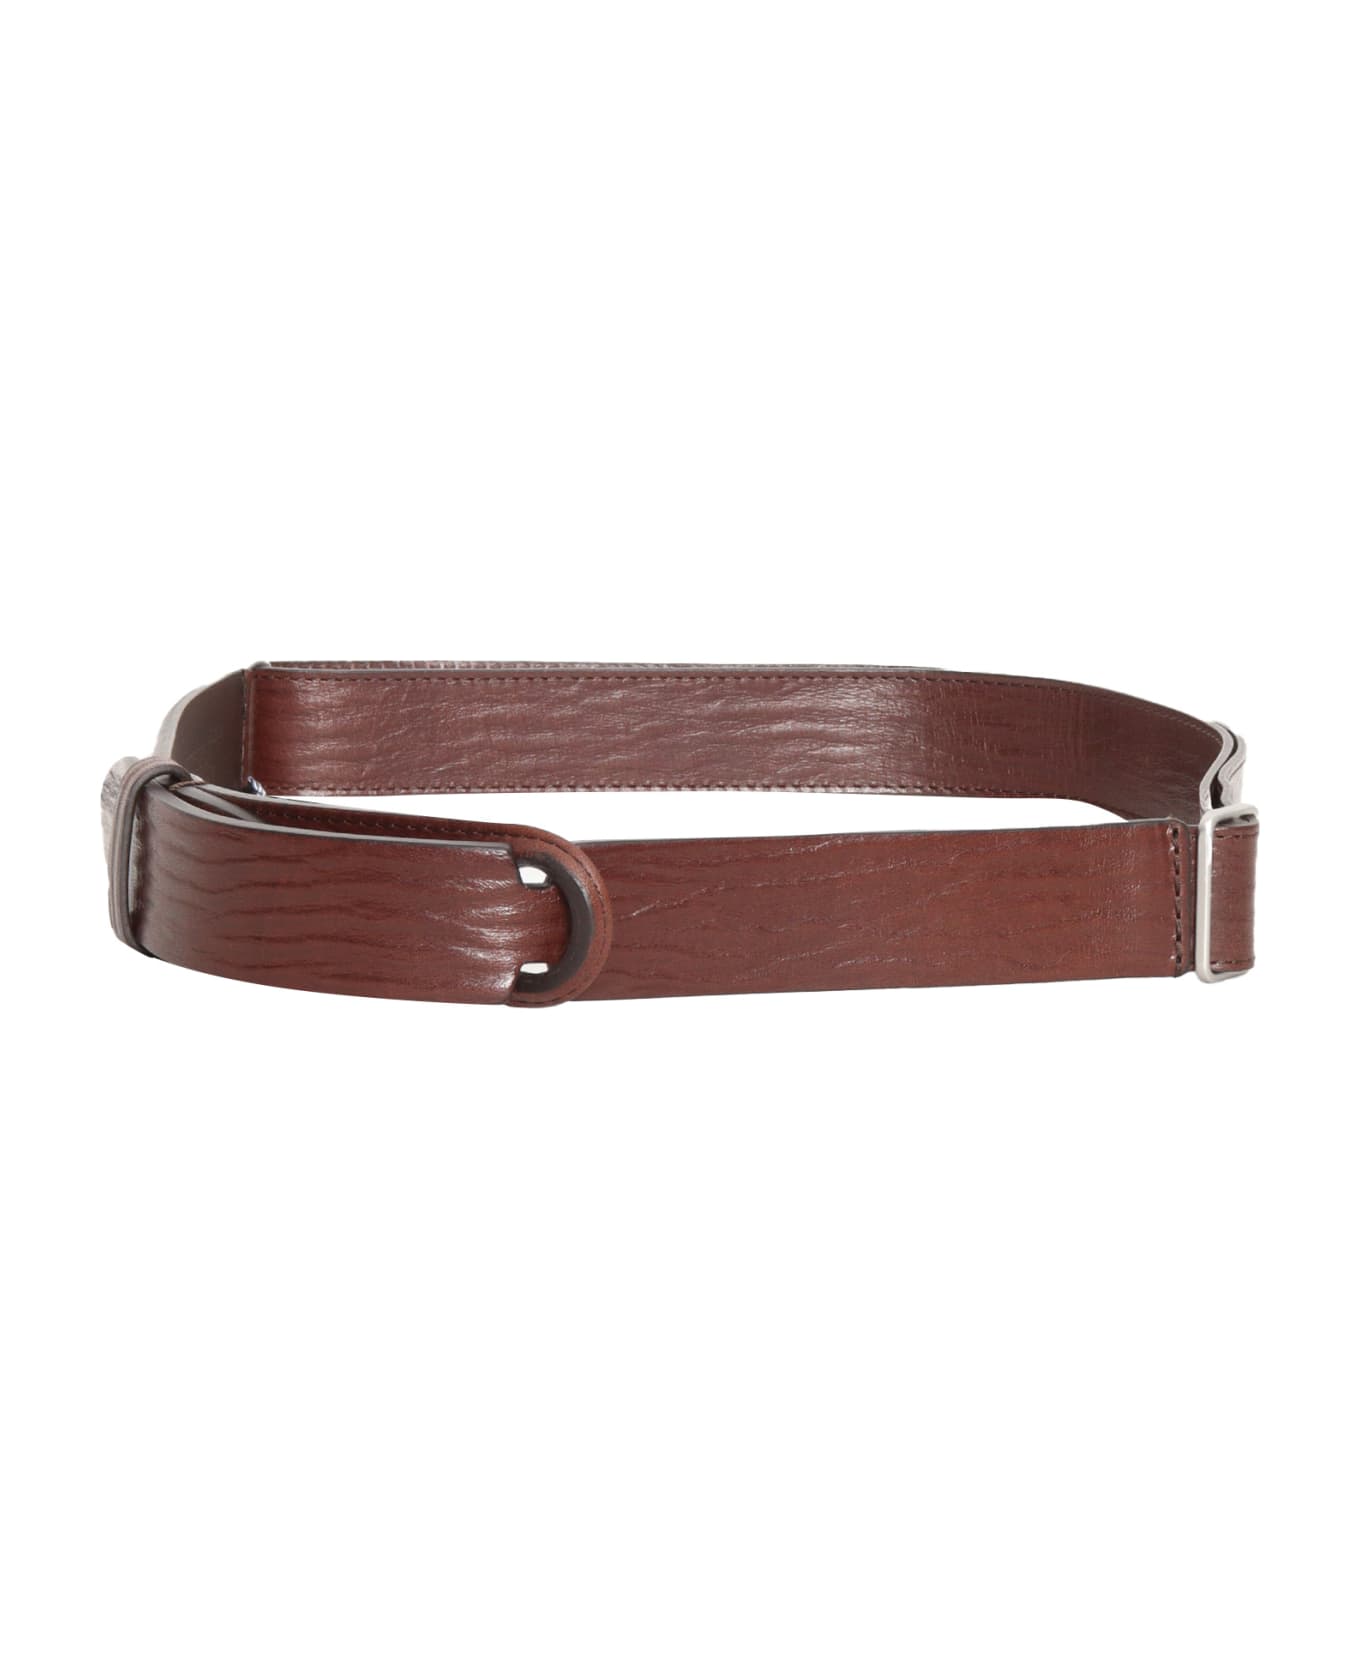 Orciani No Buckle Belt - BROWN